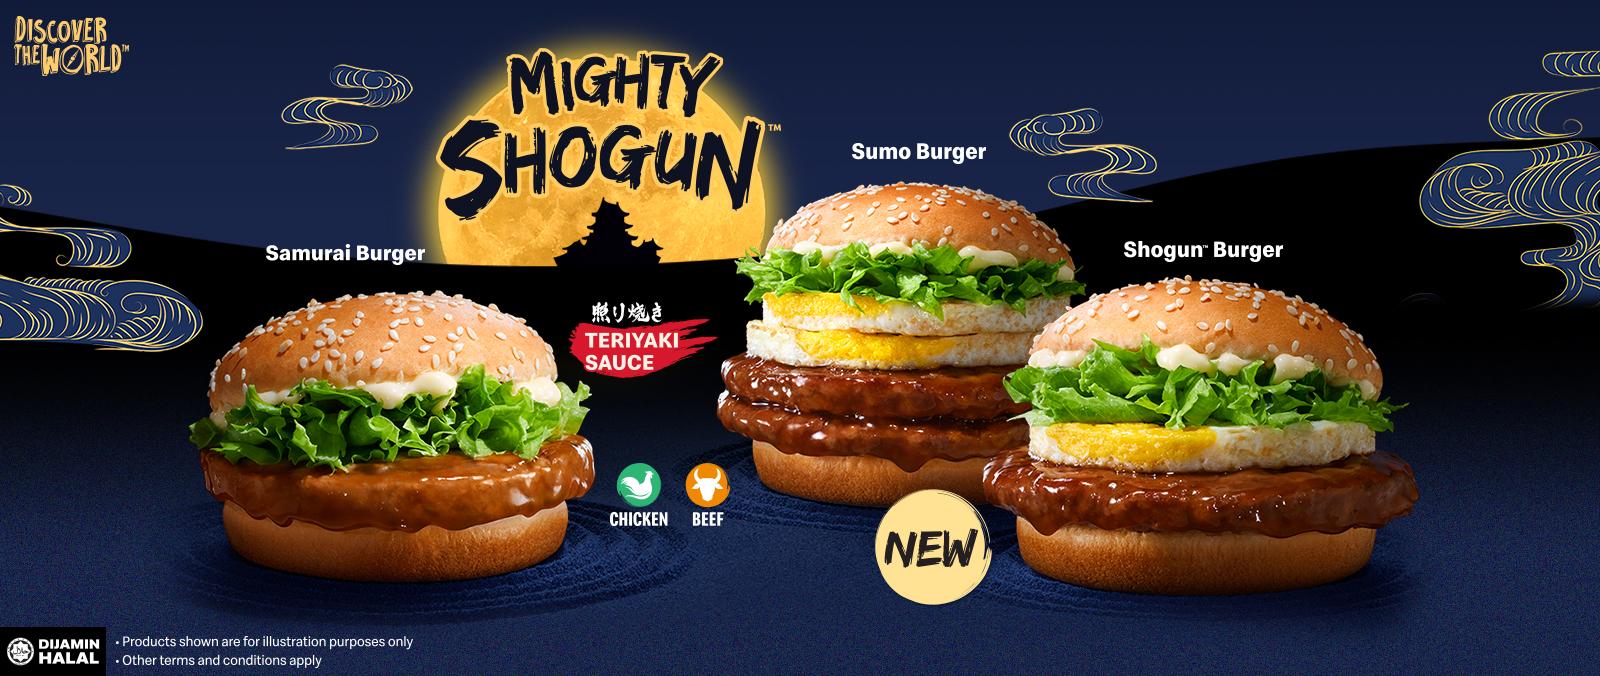 The NEW mightier legends Shogun Burger and Sumo Burger have arrived!'s image'